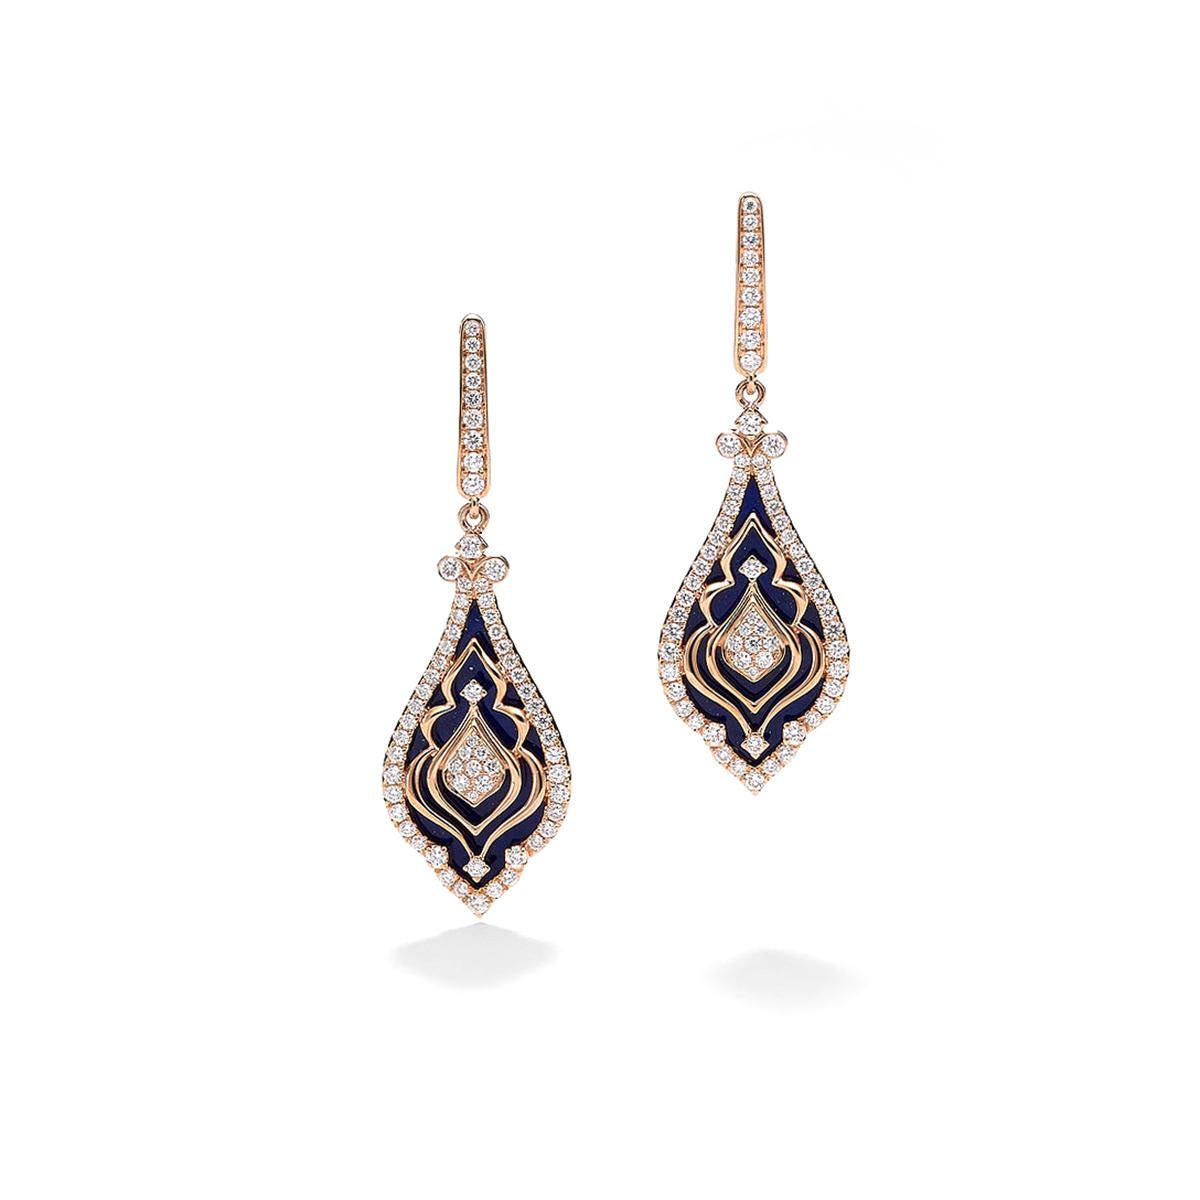 Earrings in 18kt pink gold set with 128 diamonds 1.12 cts and 2 lapis lazuli 4.88 cts               